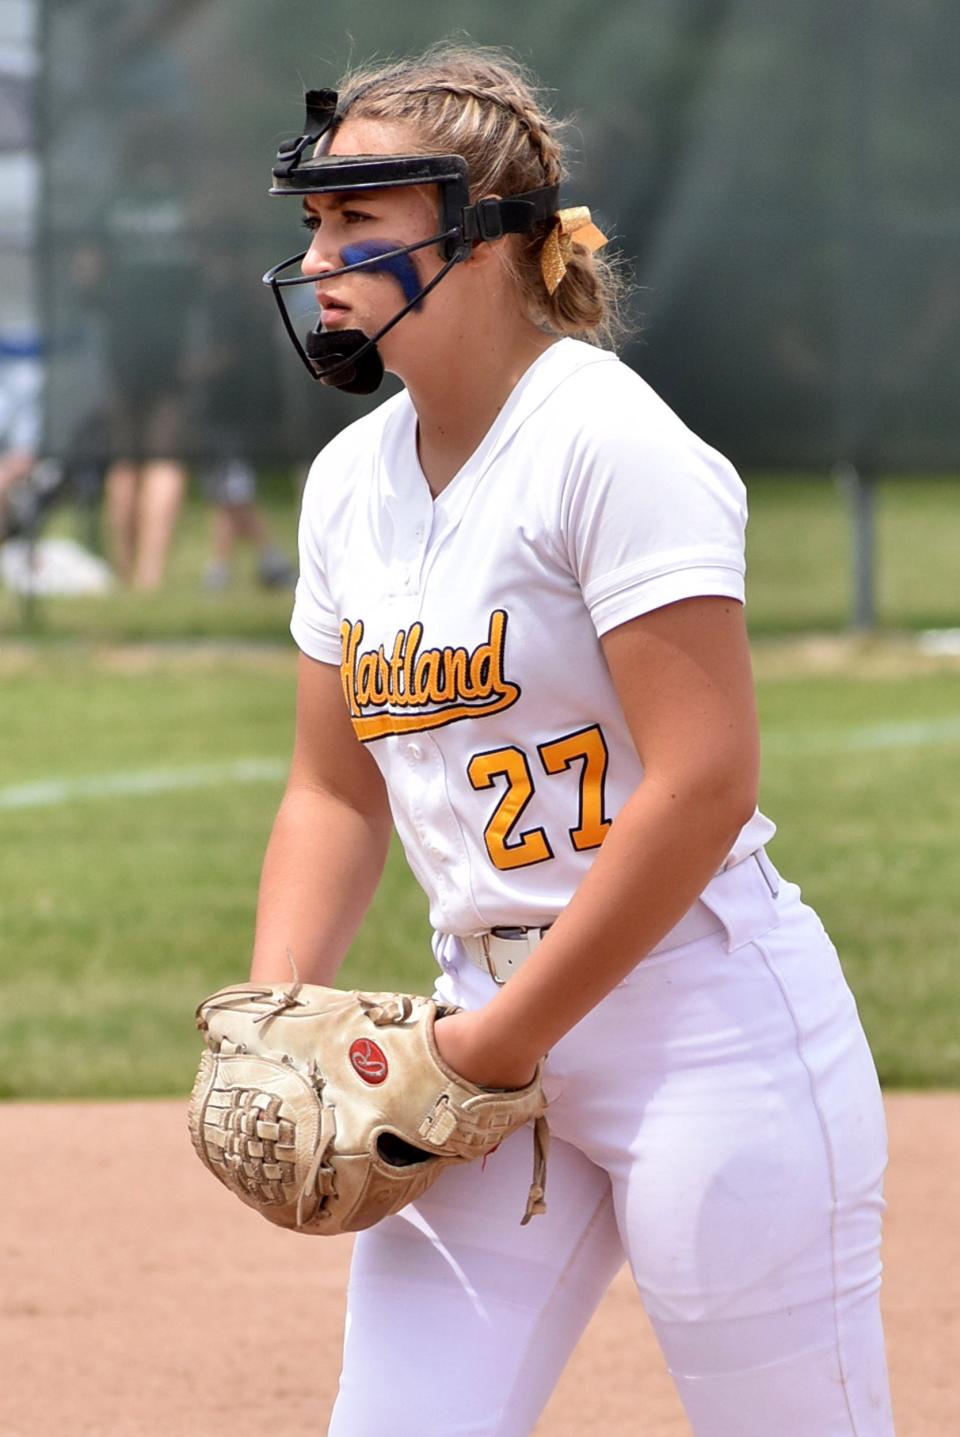 Hartland's Kylie Swierkos had an 18-4 record with a 2.10 ERA in 2022.